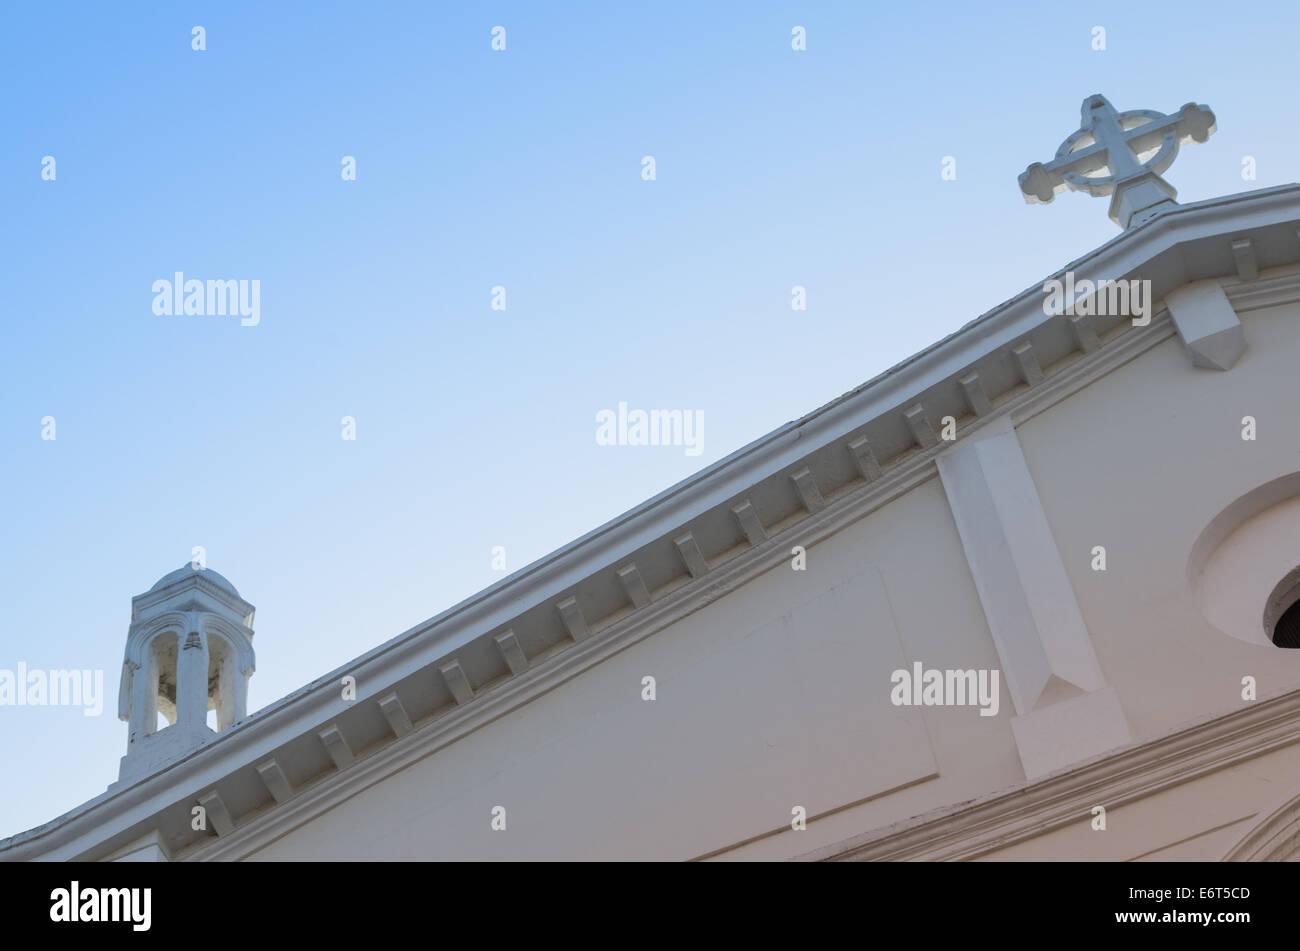 Church roof with Latin cross, angle view Stock Photo